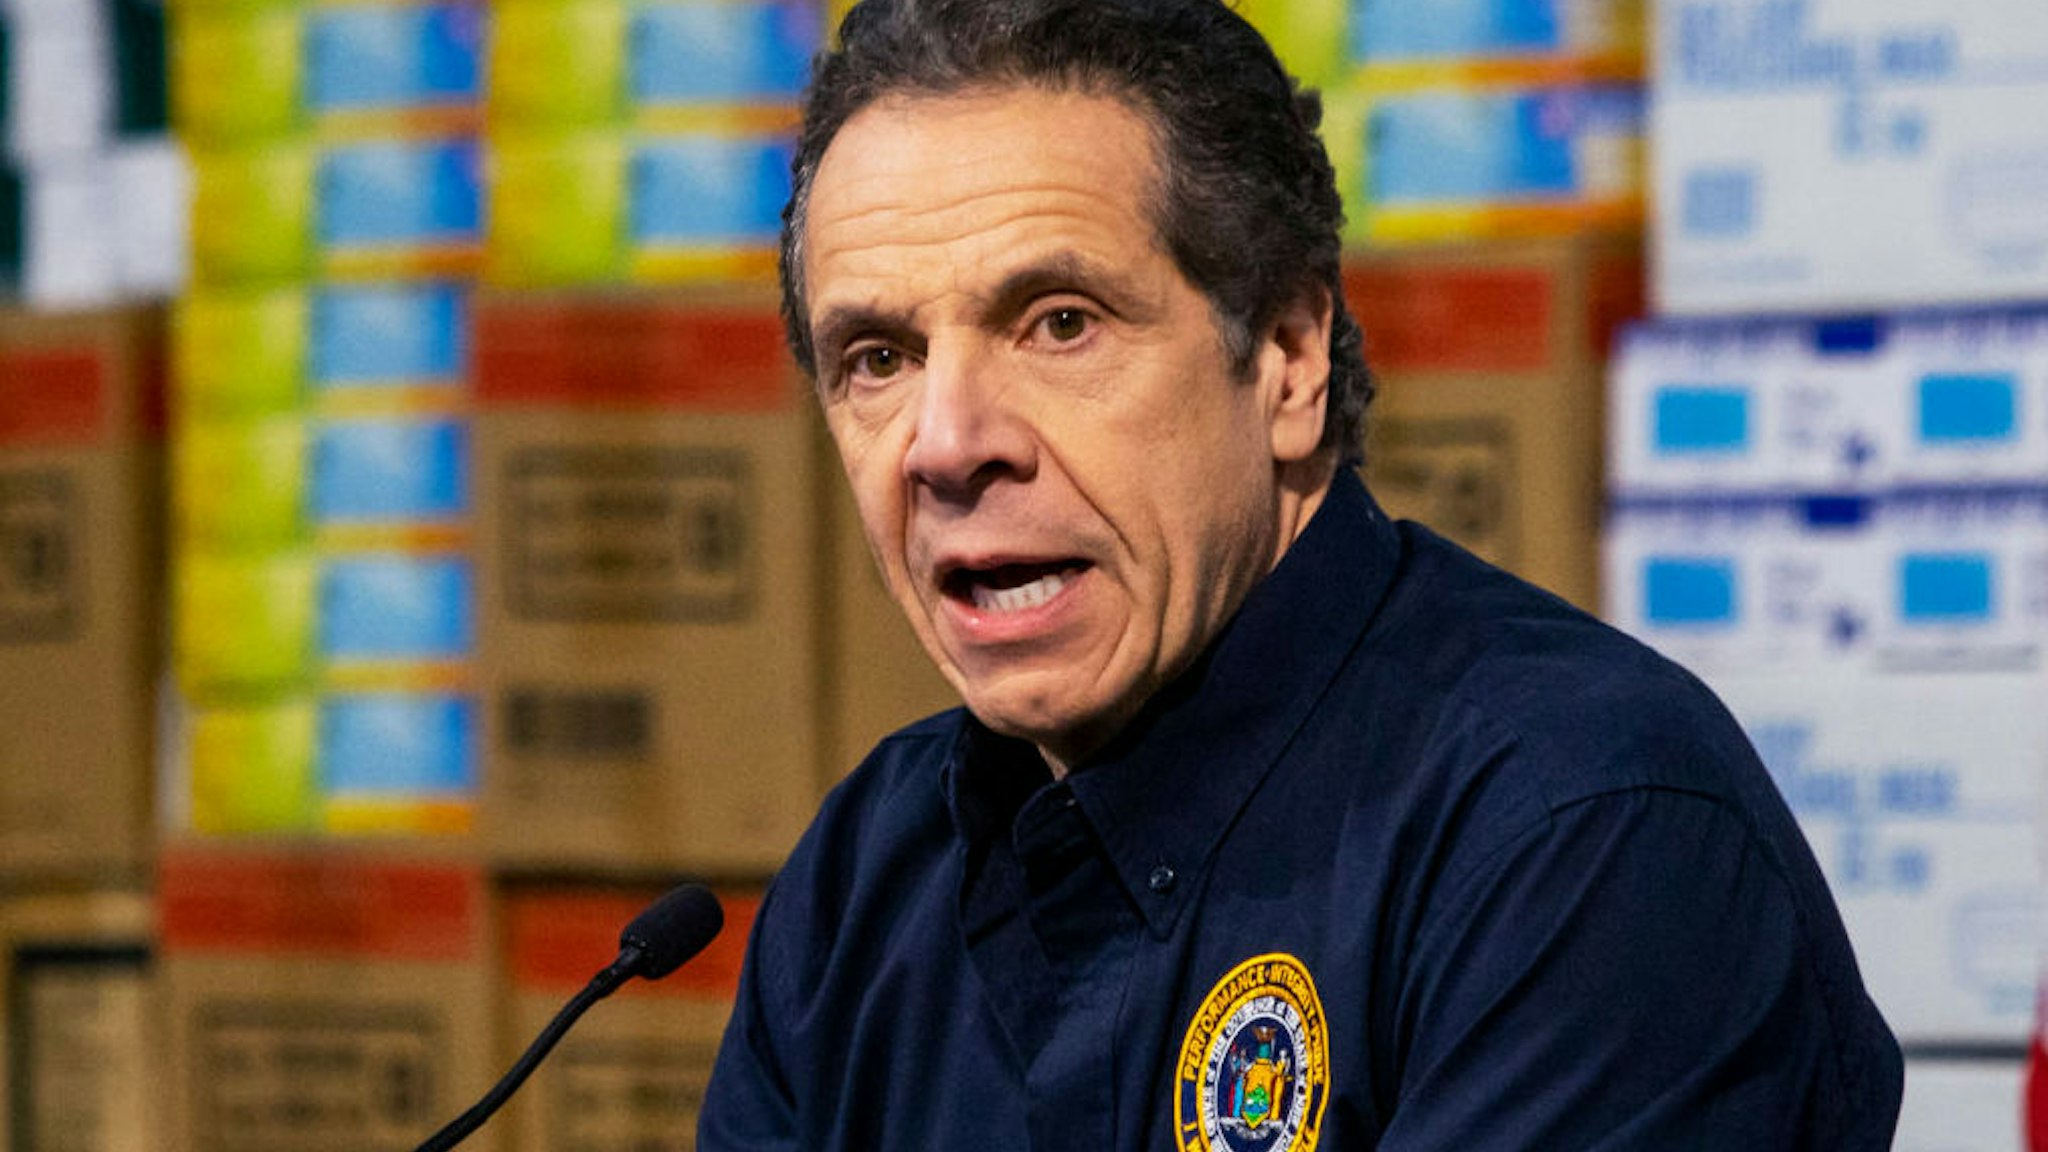 New York Governor Andrew Cuomo speaks to the media at the Javits Convention Center which is being turned into a hospital to help fight coronavirus cases on March 24, 2020 in New York City.